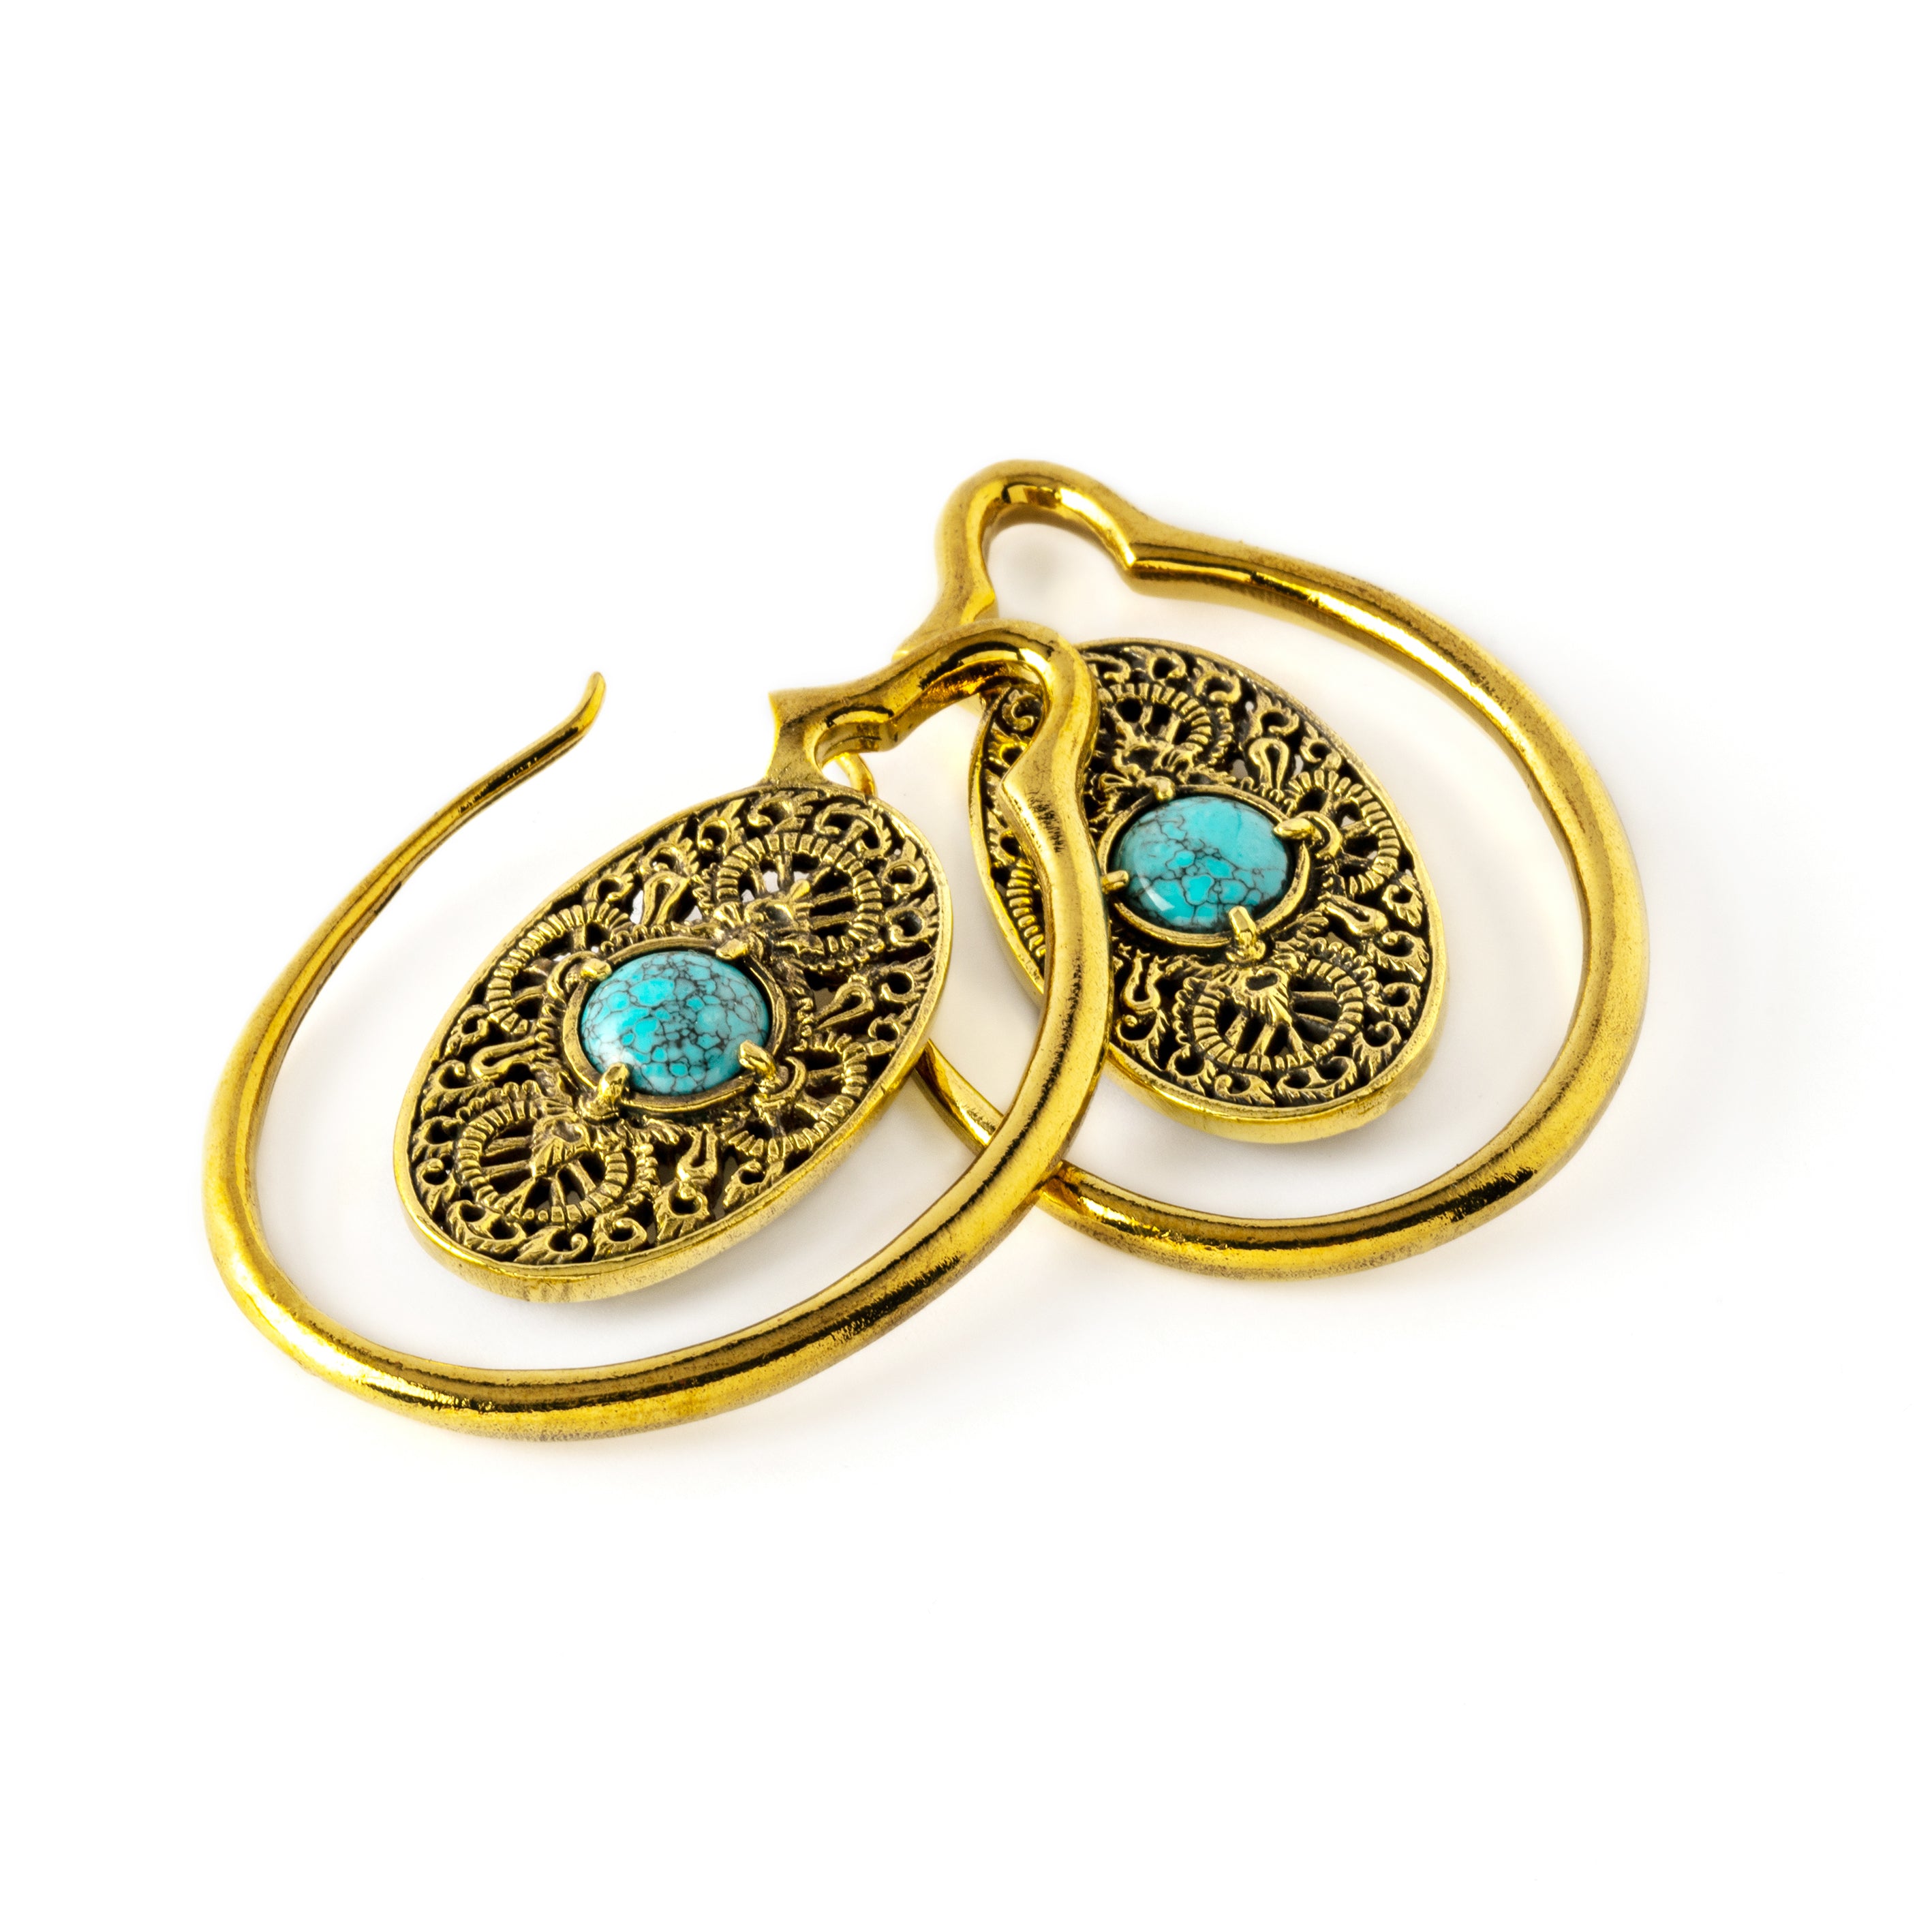 golden large ear weights hangers oval shaped with intricate filigree pattern and turquoise